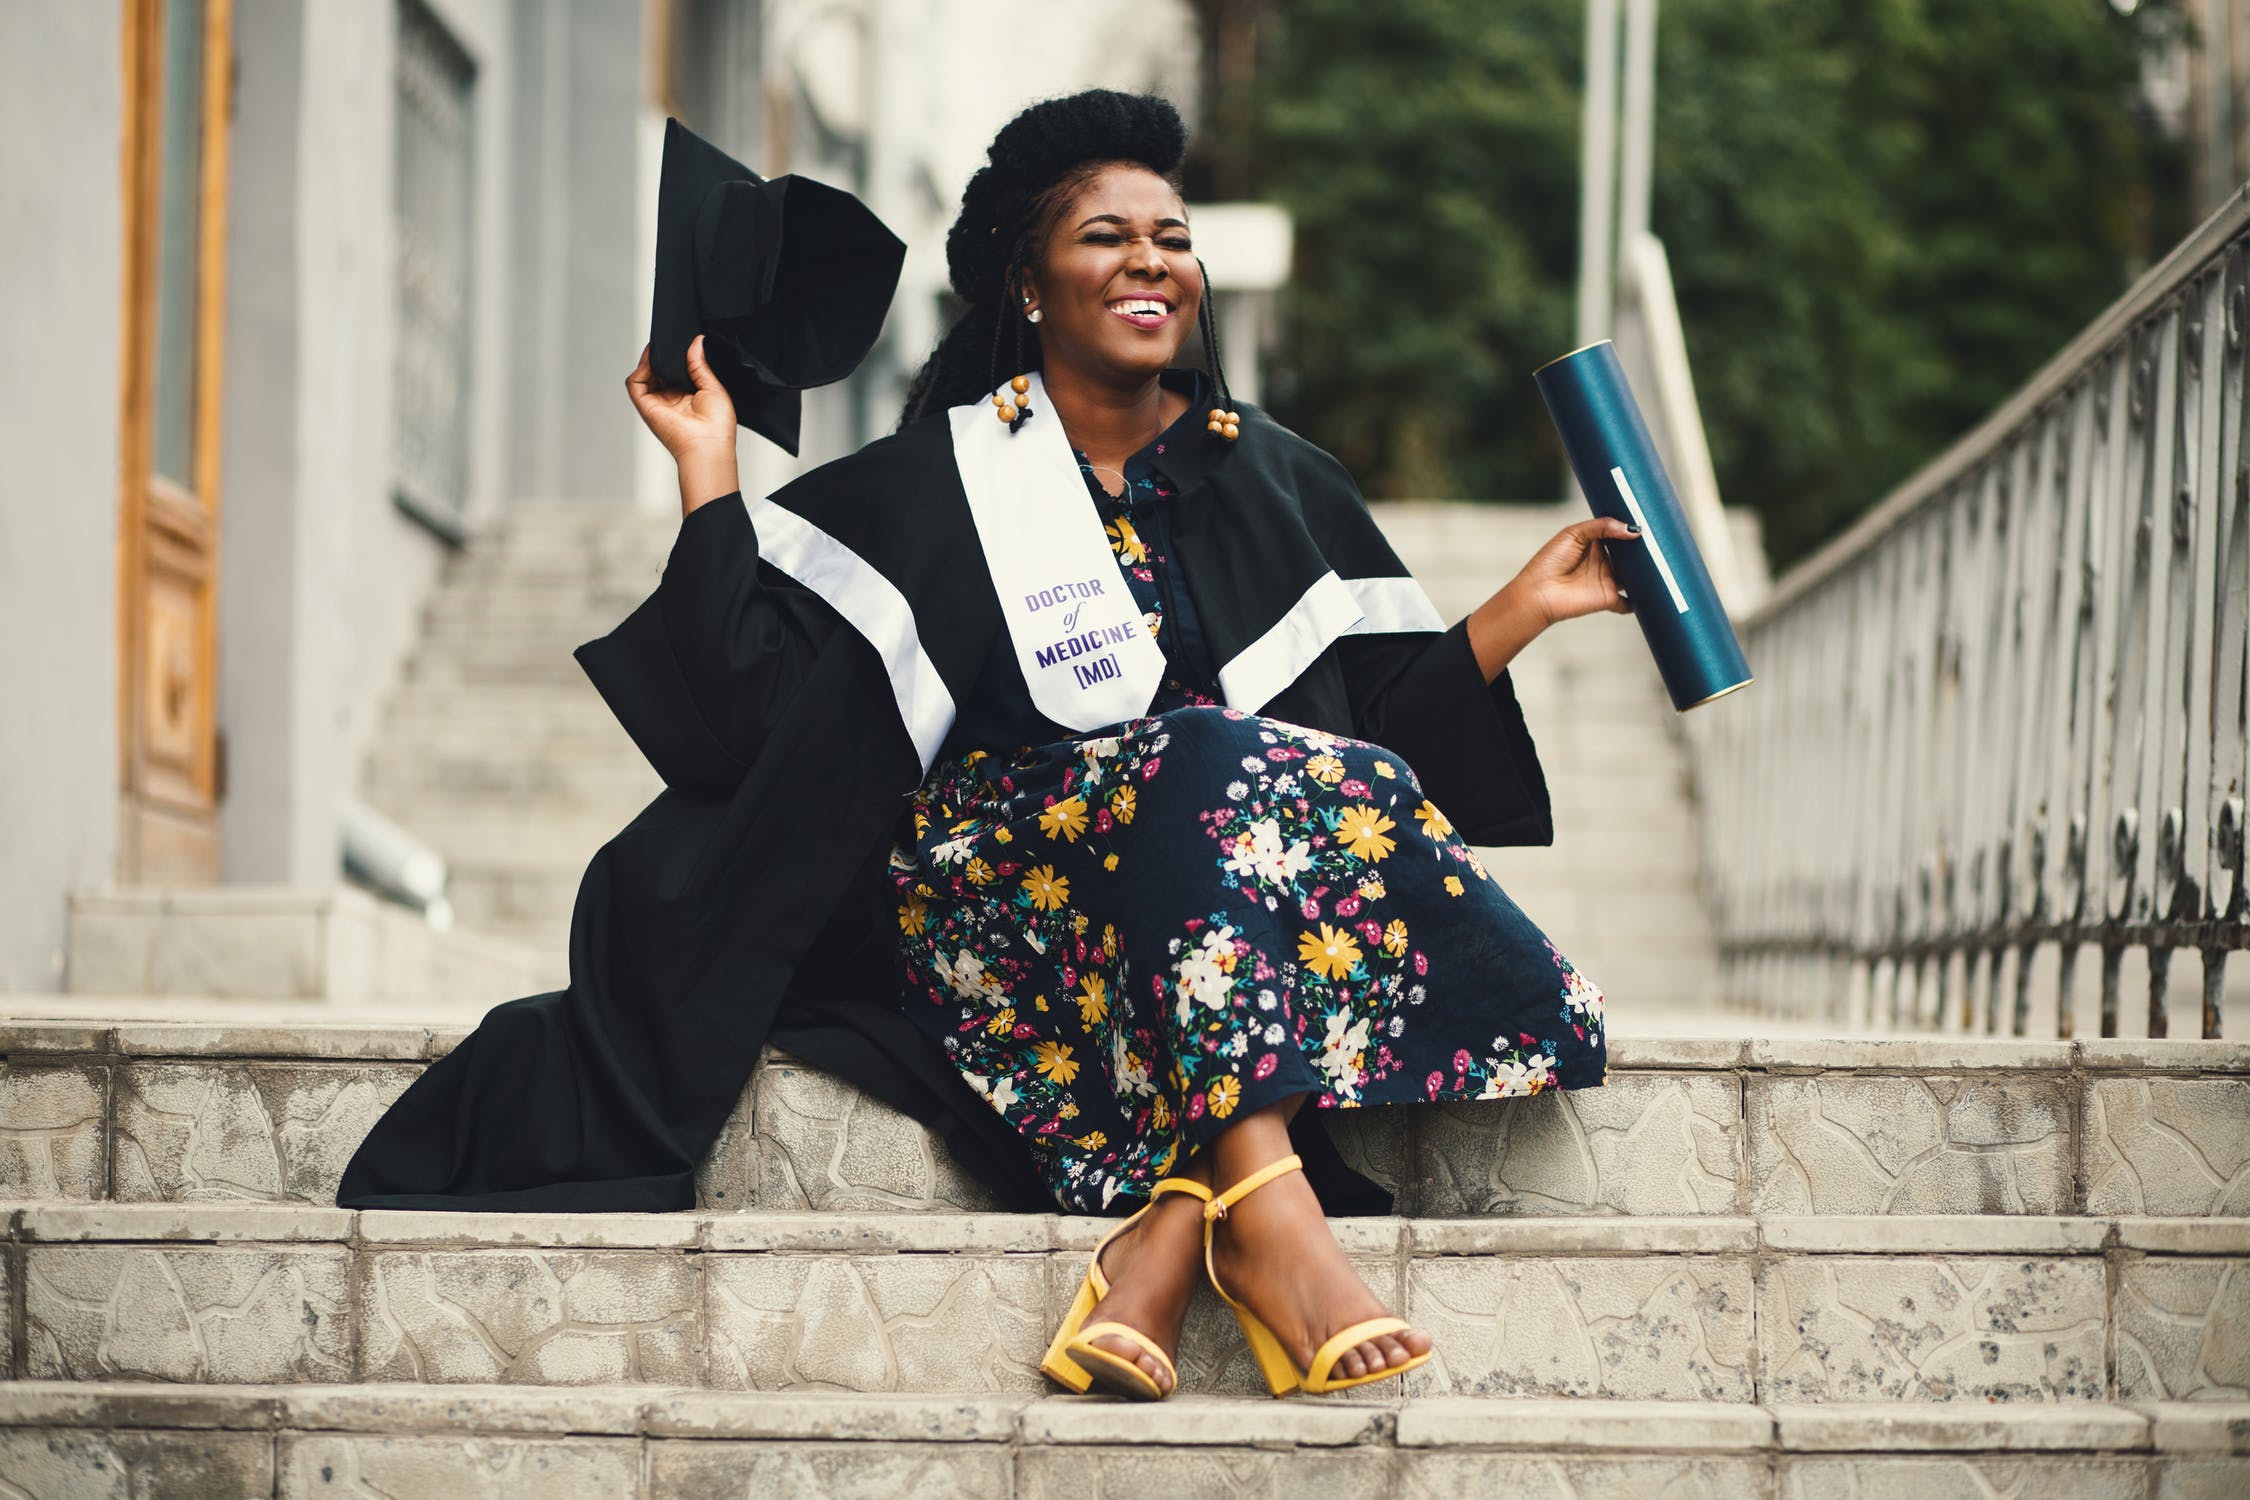 5 ways to make your graduate feel special